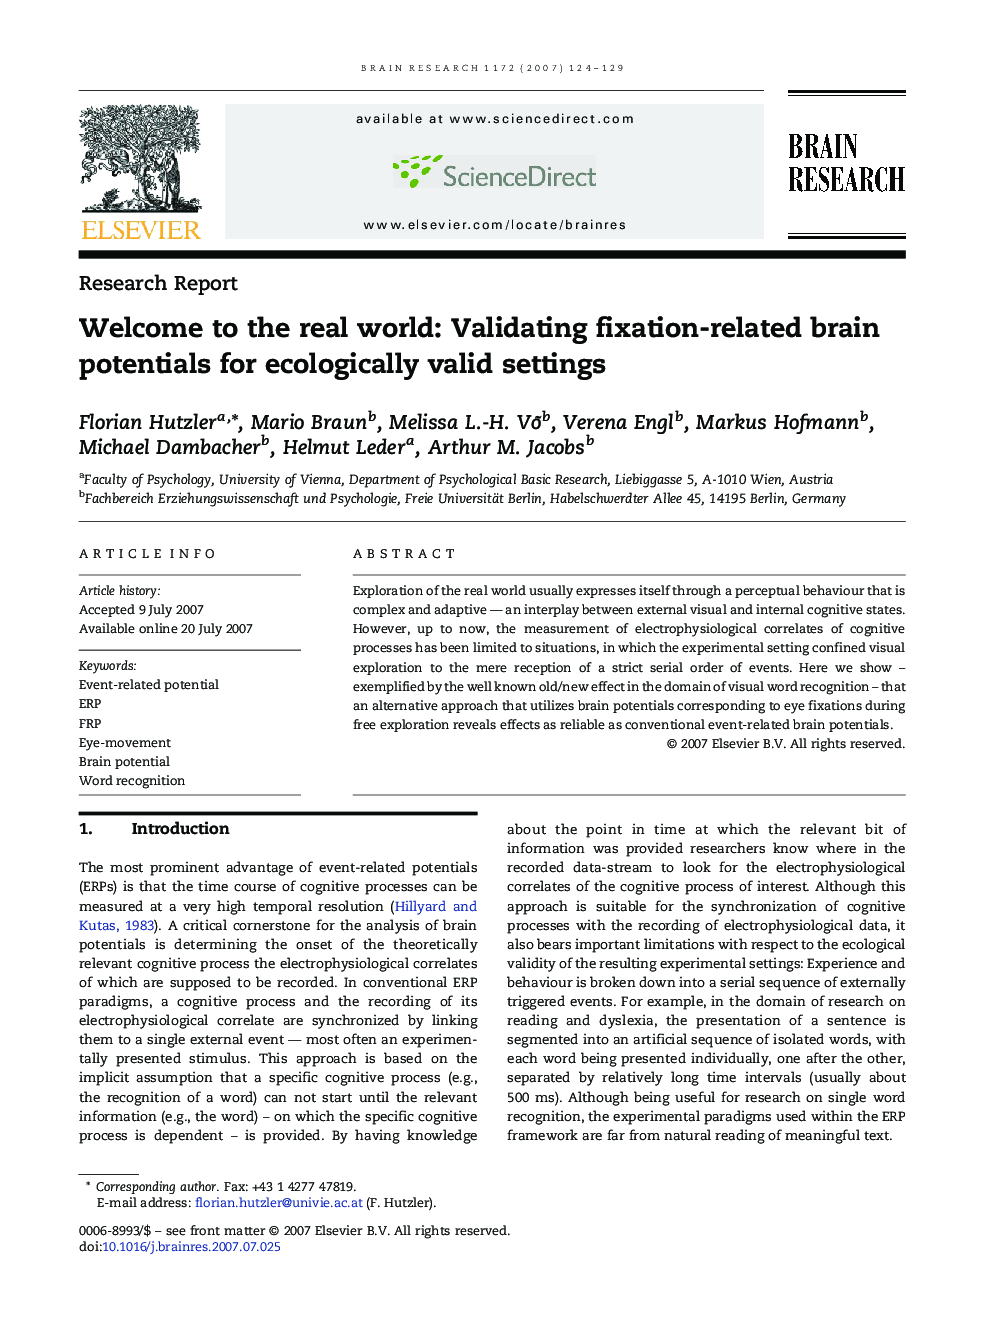 Welcome to the real world: Validating fixation-related brain potentials for ecologically valid settings